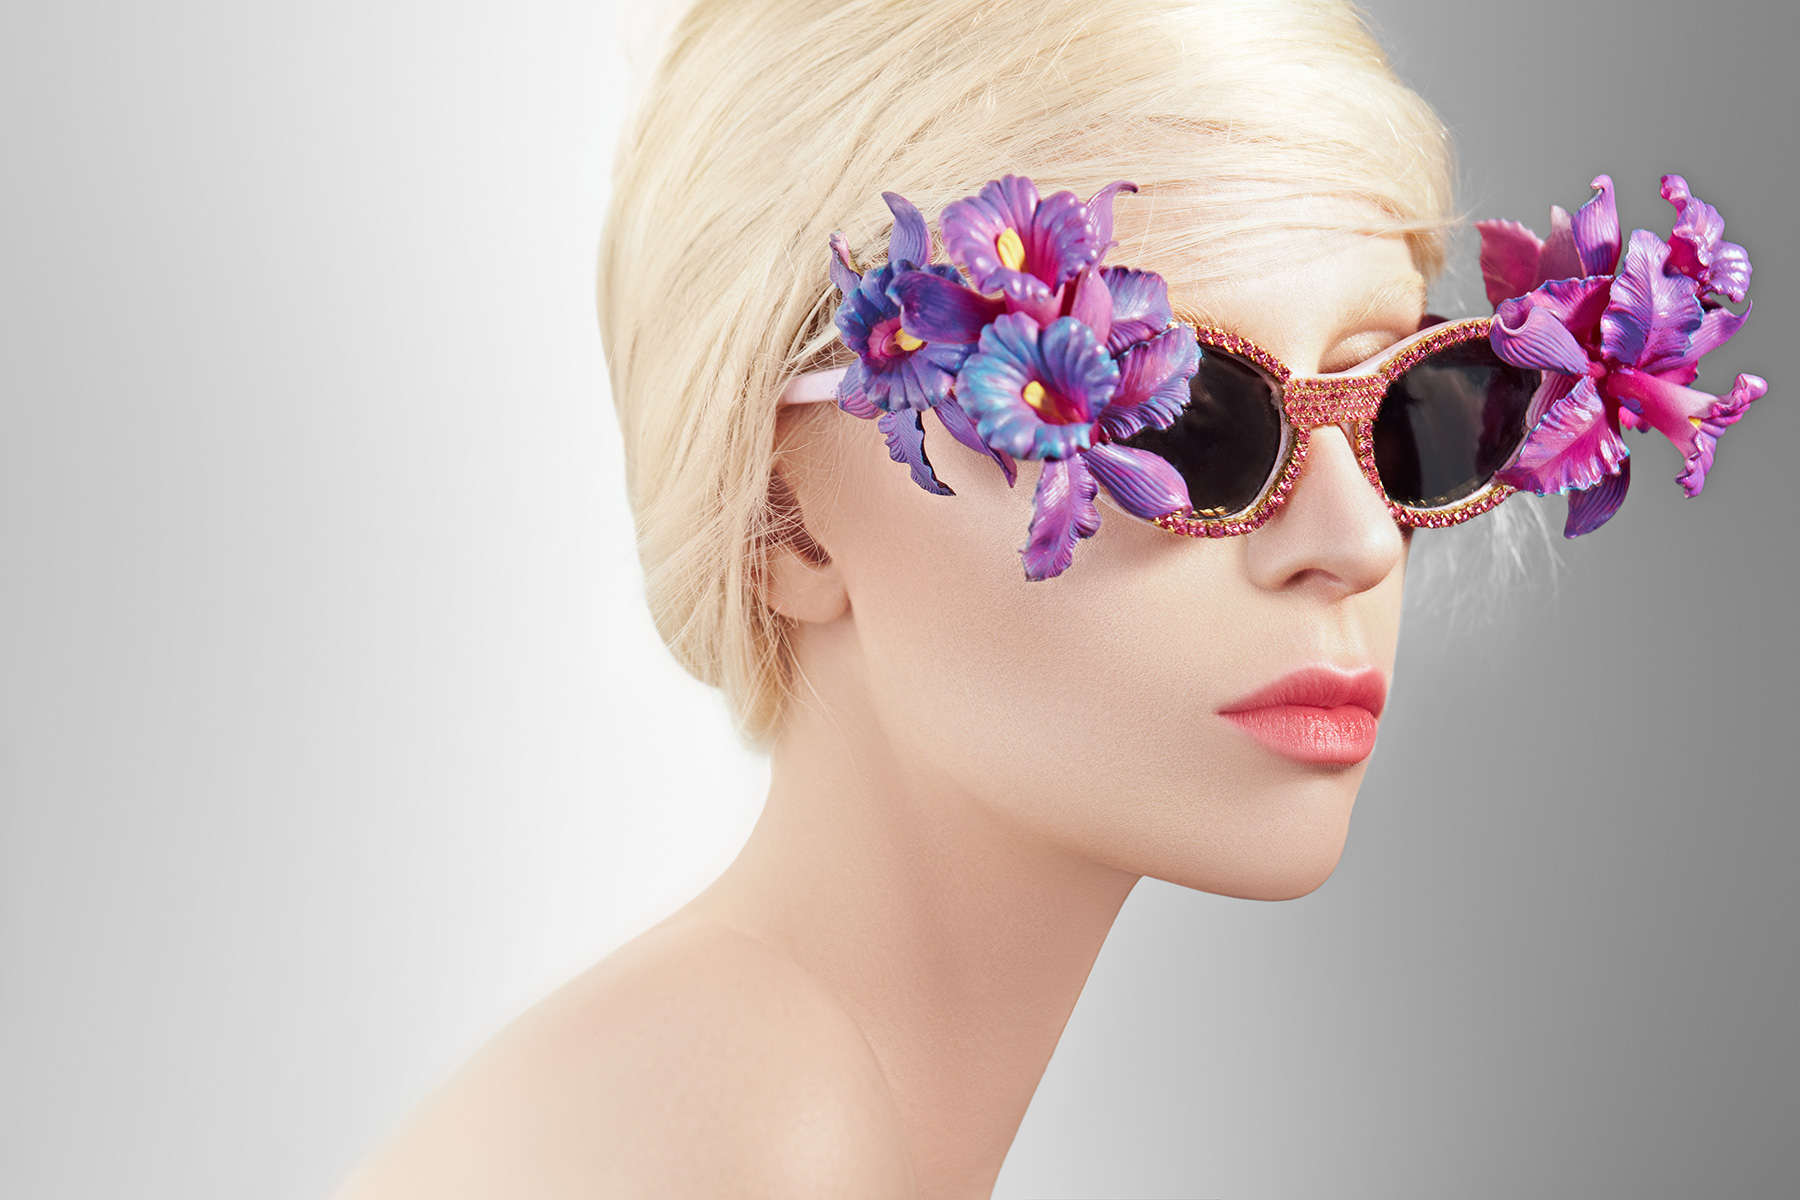 sunglasses collection retouch